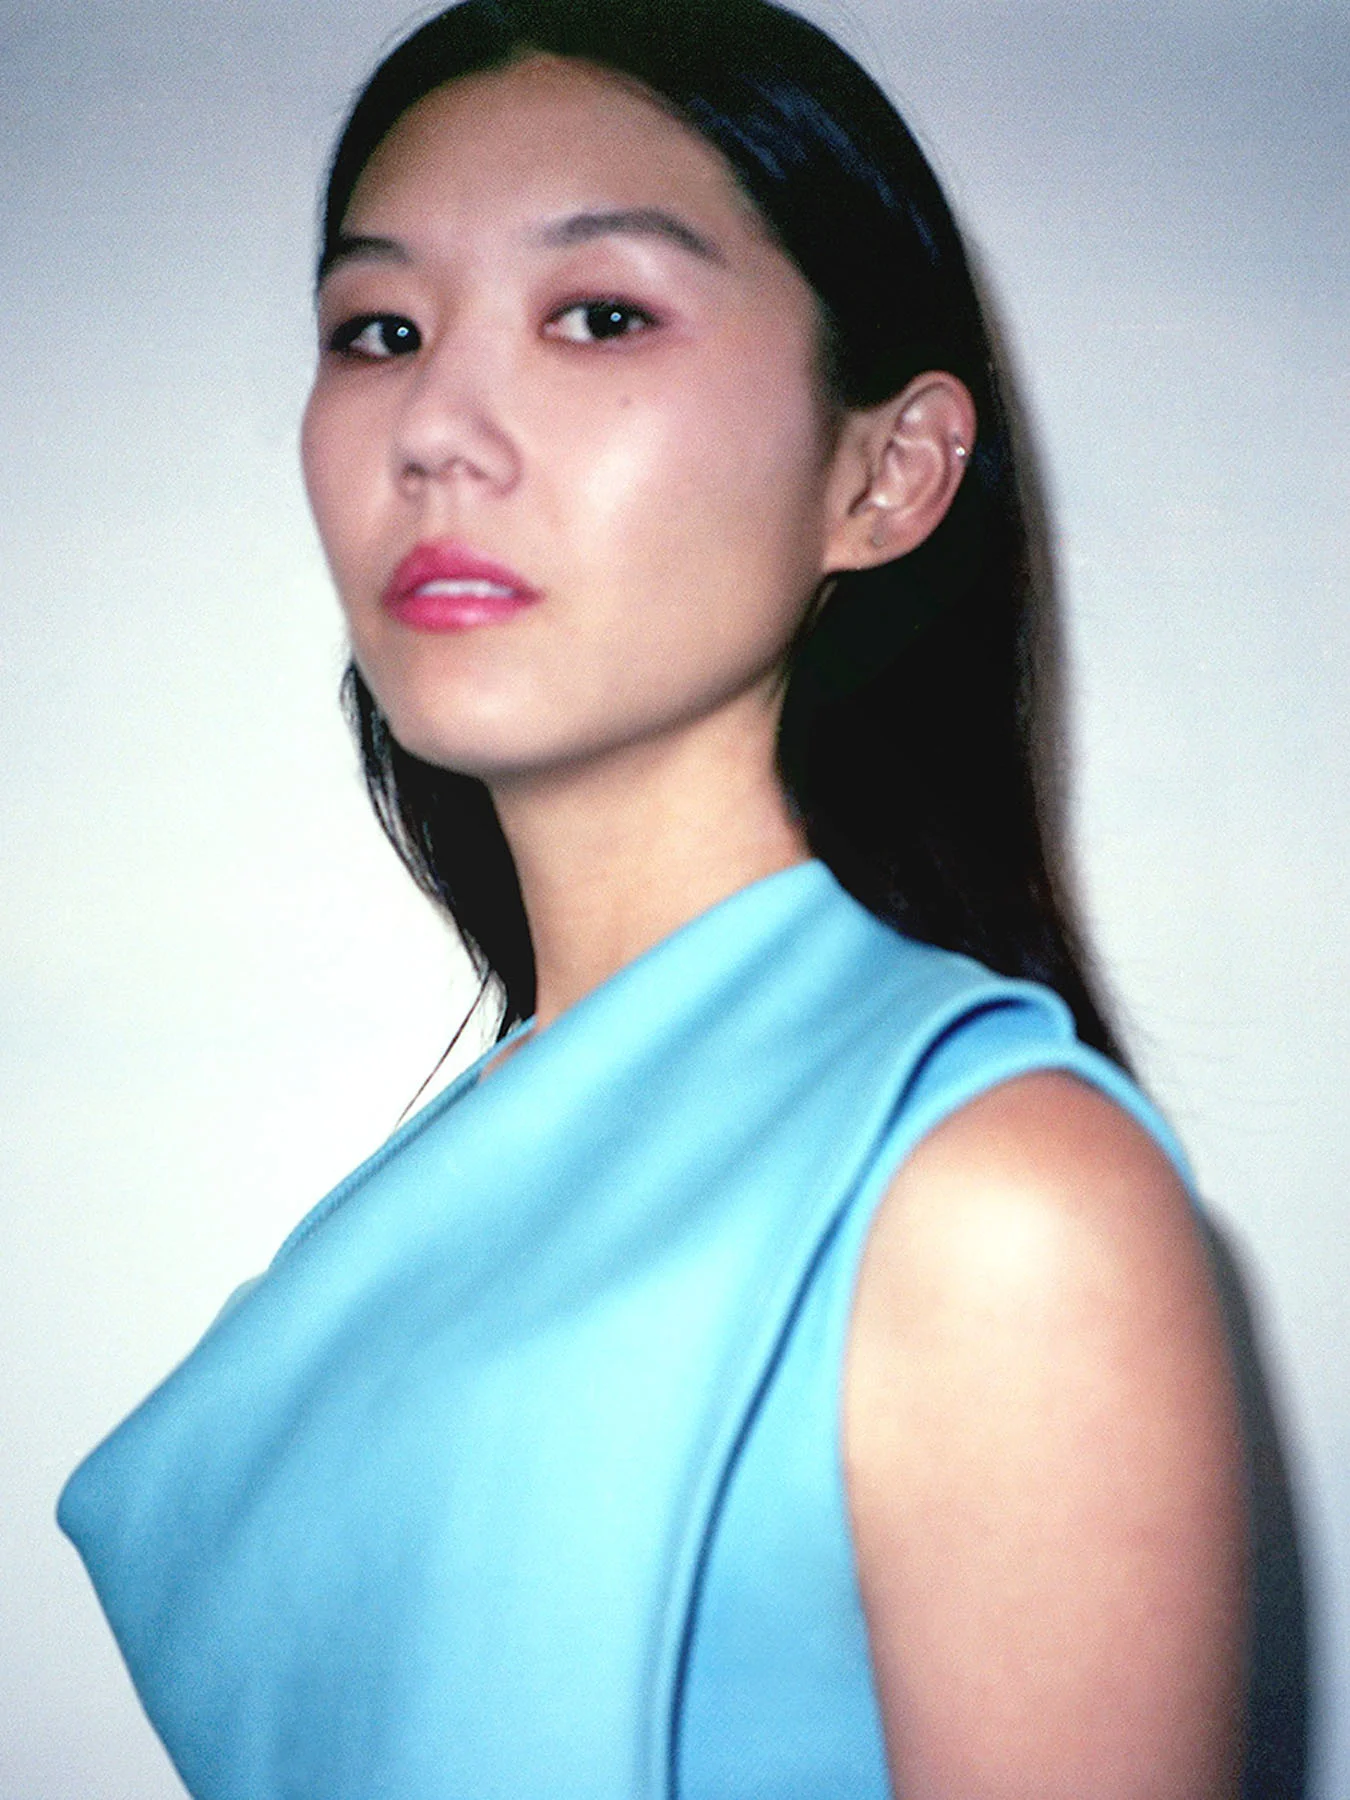 A woman stands facing the camera in a blue shirt.